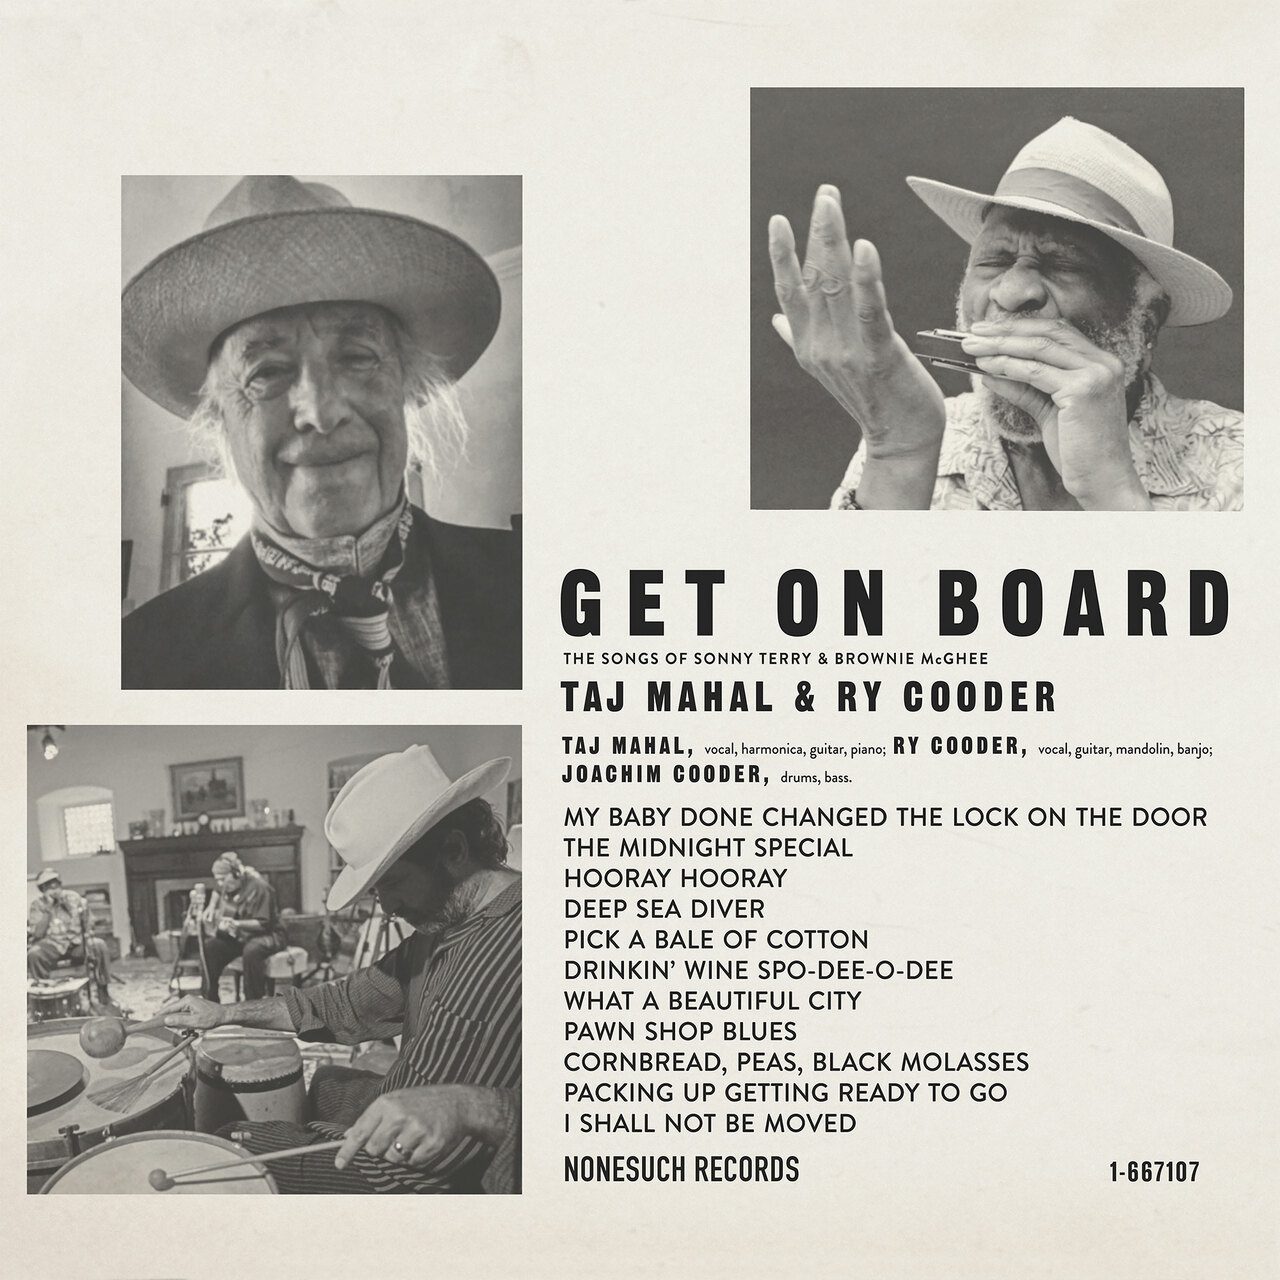 Taj Mahal and Ry Cooder – Get On Board: The Song of Sonny Terry and Brownie McGhee